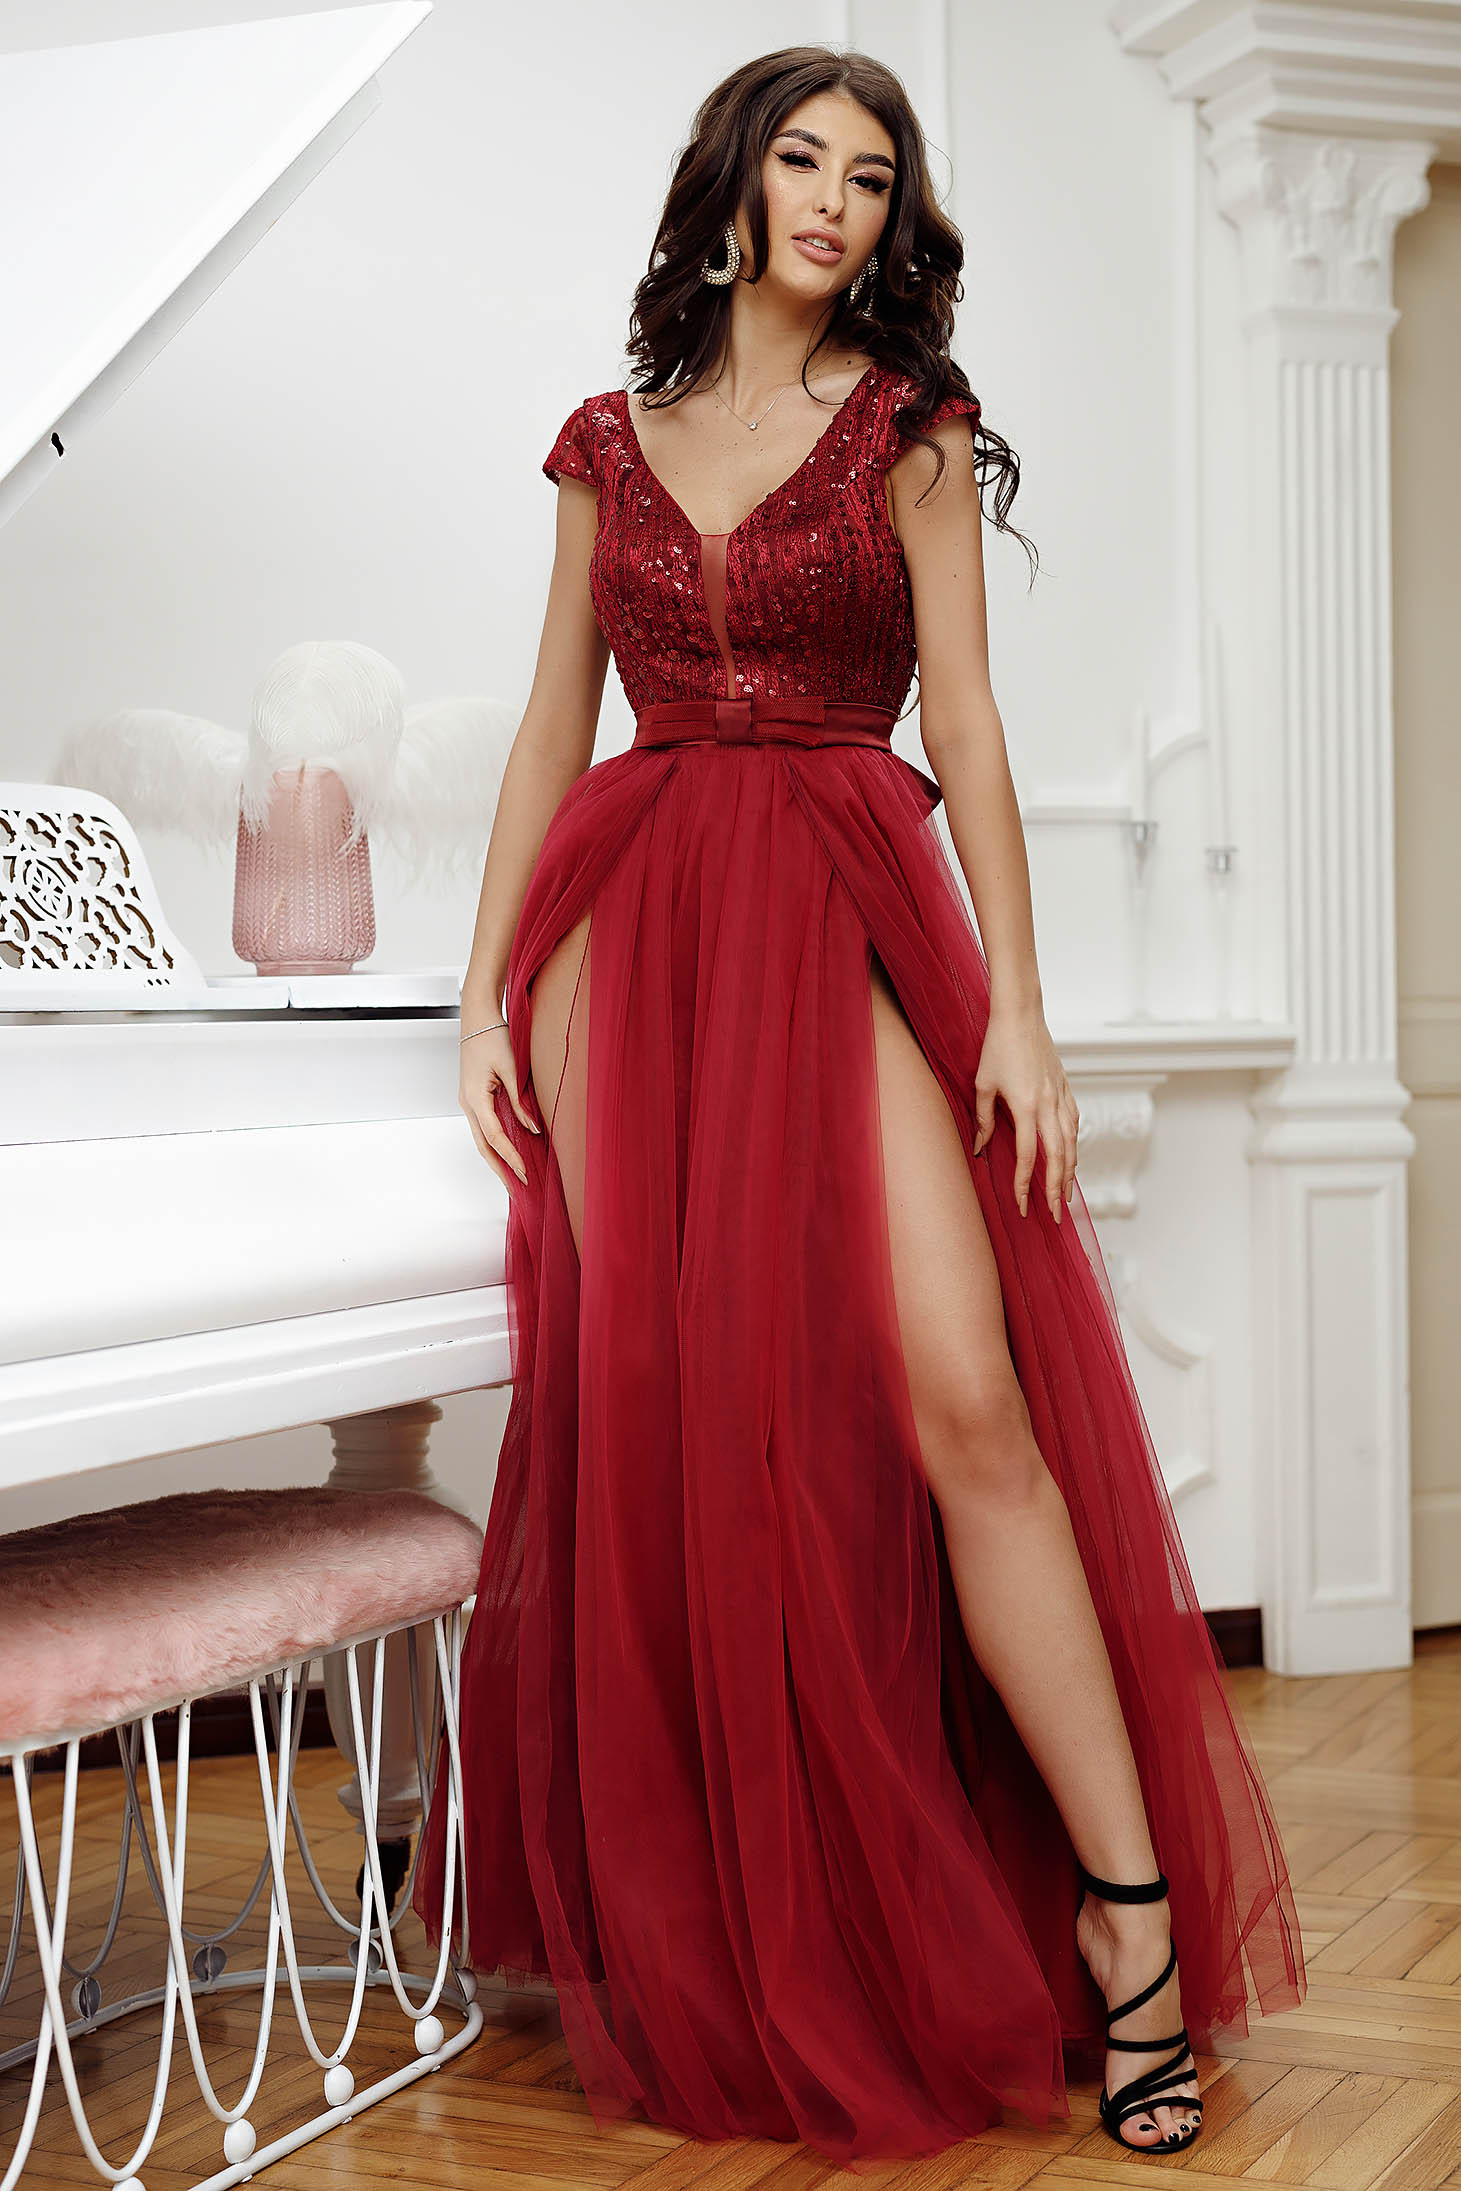 Raspberry dress from tulle cloche slit with sequin embellished details